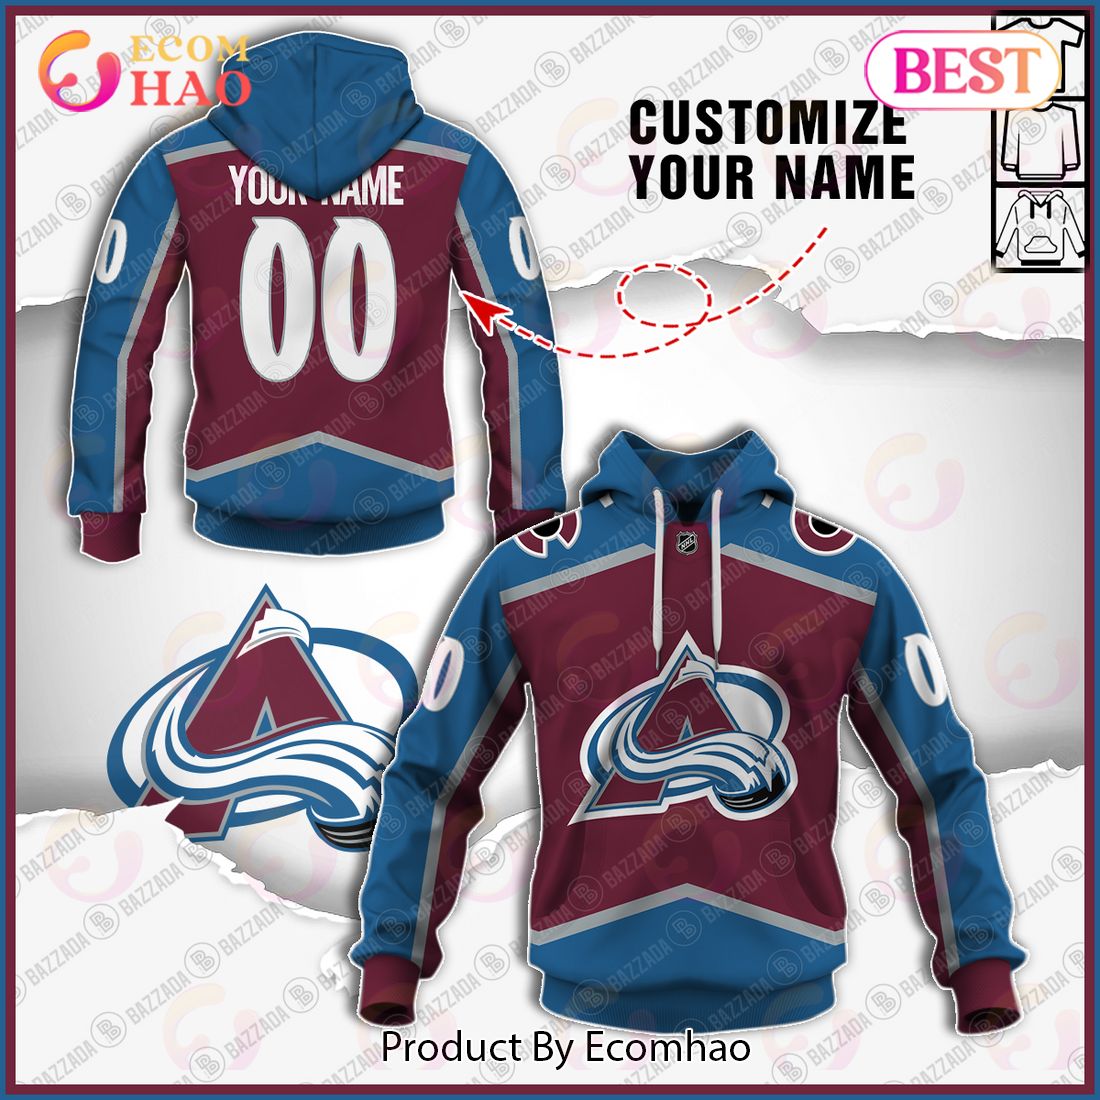 NHL Mix Home and Away 2 Teams Home jersey 2223 Shirt, Hoodie